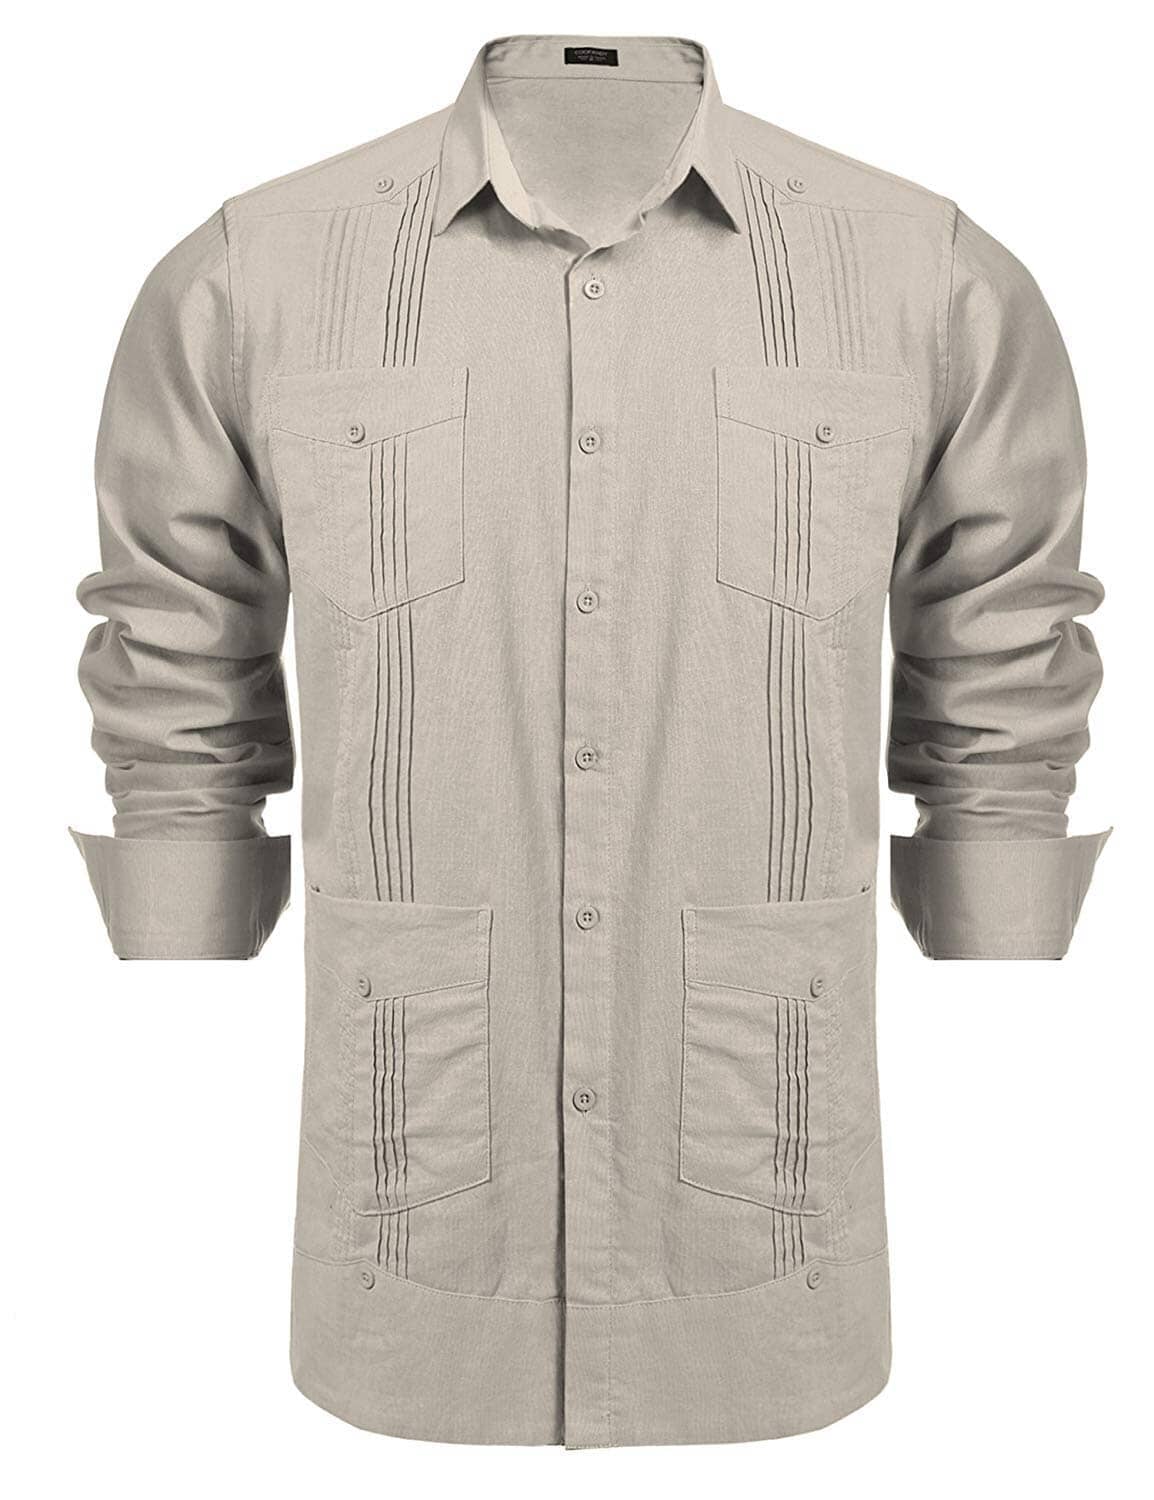 Coofandy Cotton Style Pocket Shirt (US Only) Shirts coofandy 